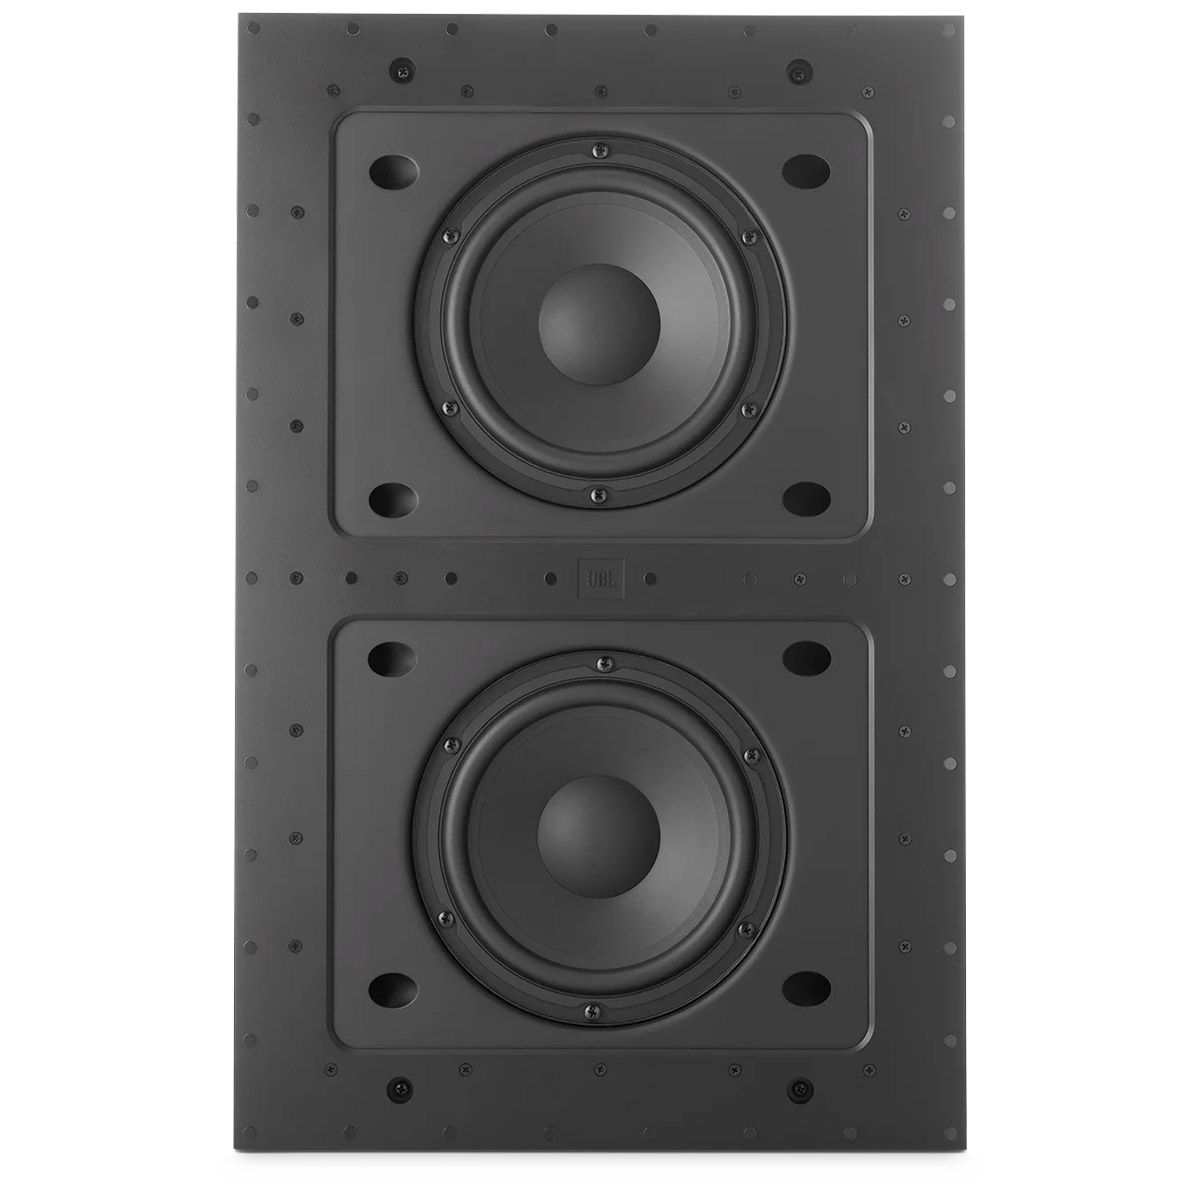 JBL Synthesis SSW-4 Dual 8" In-Wall Subwoofer